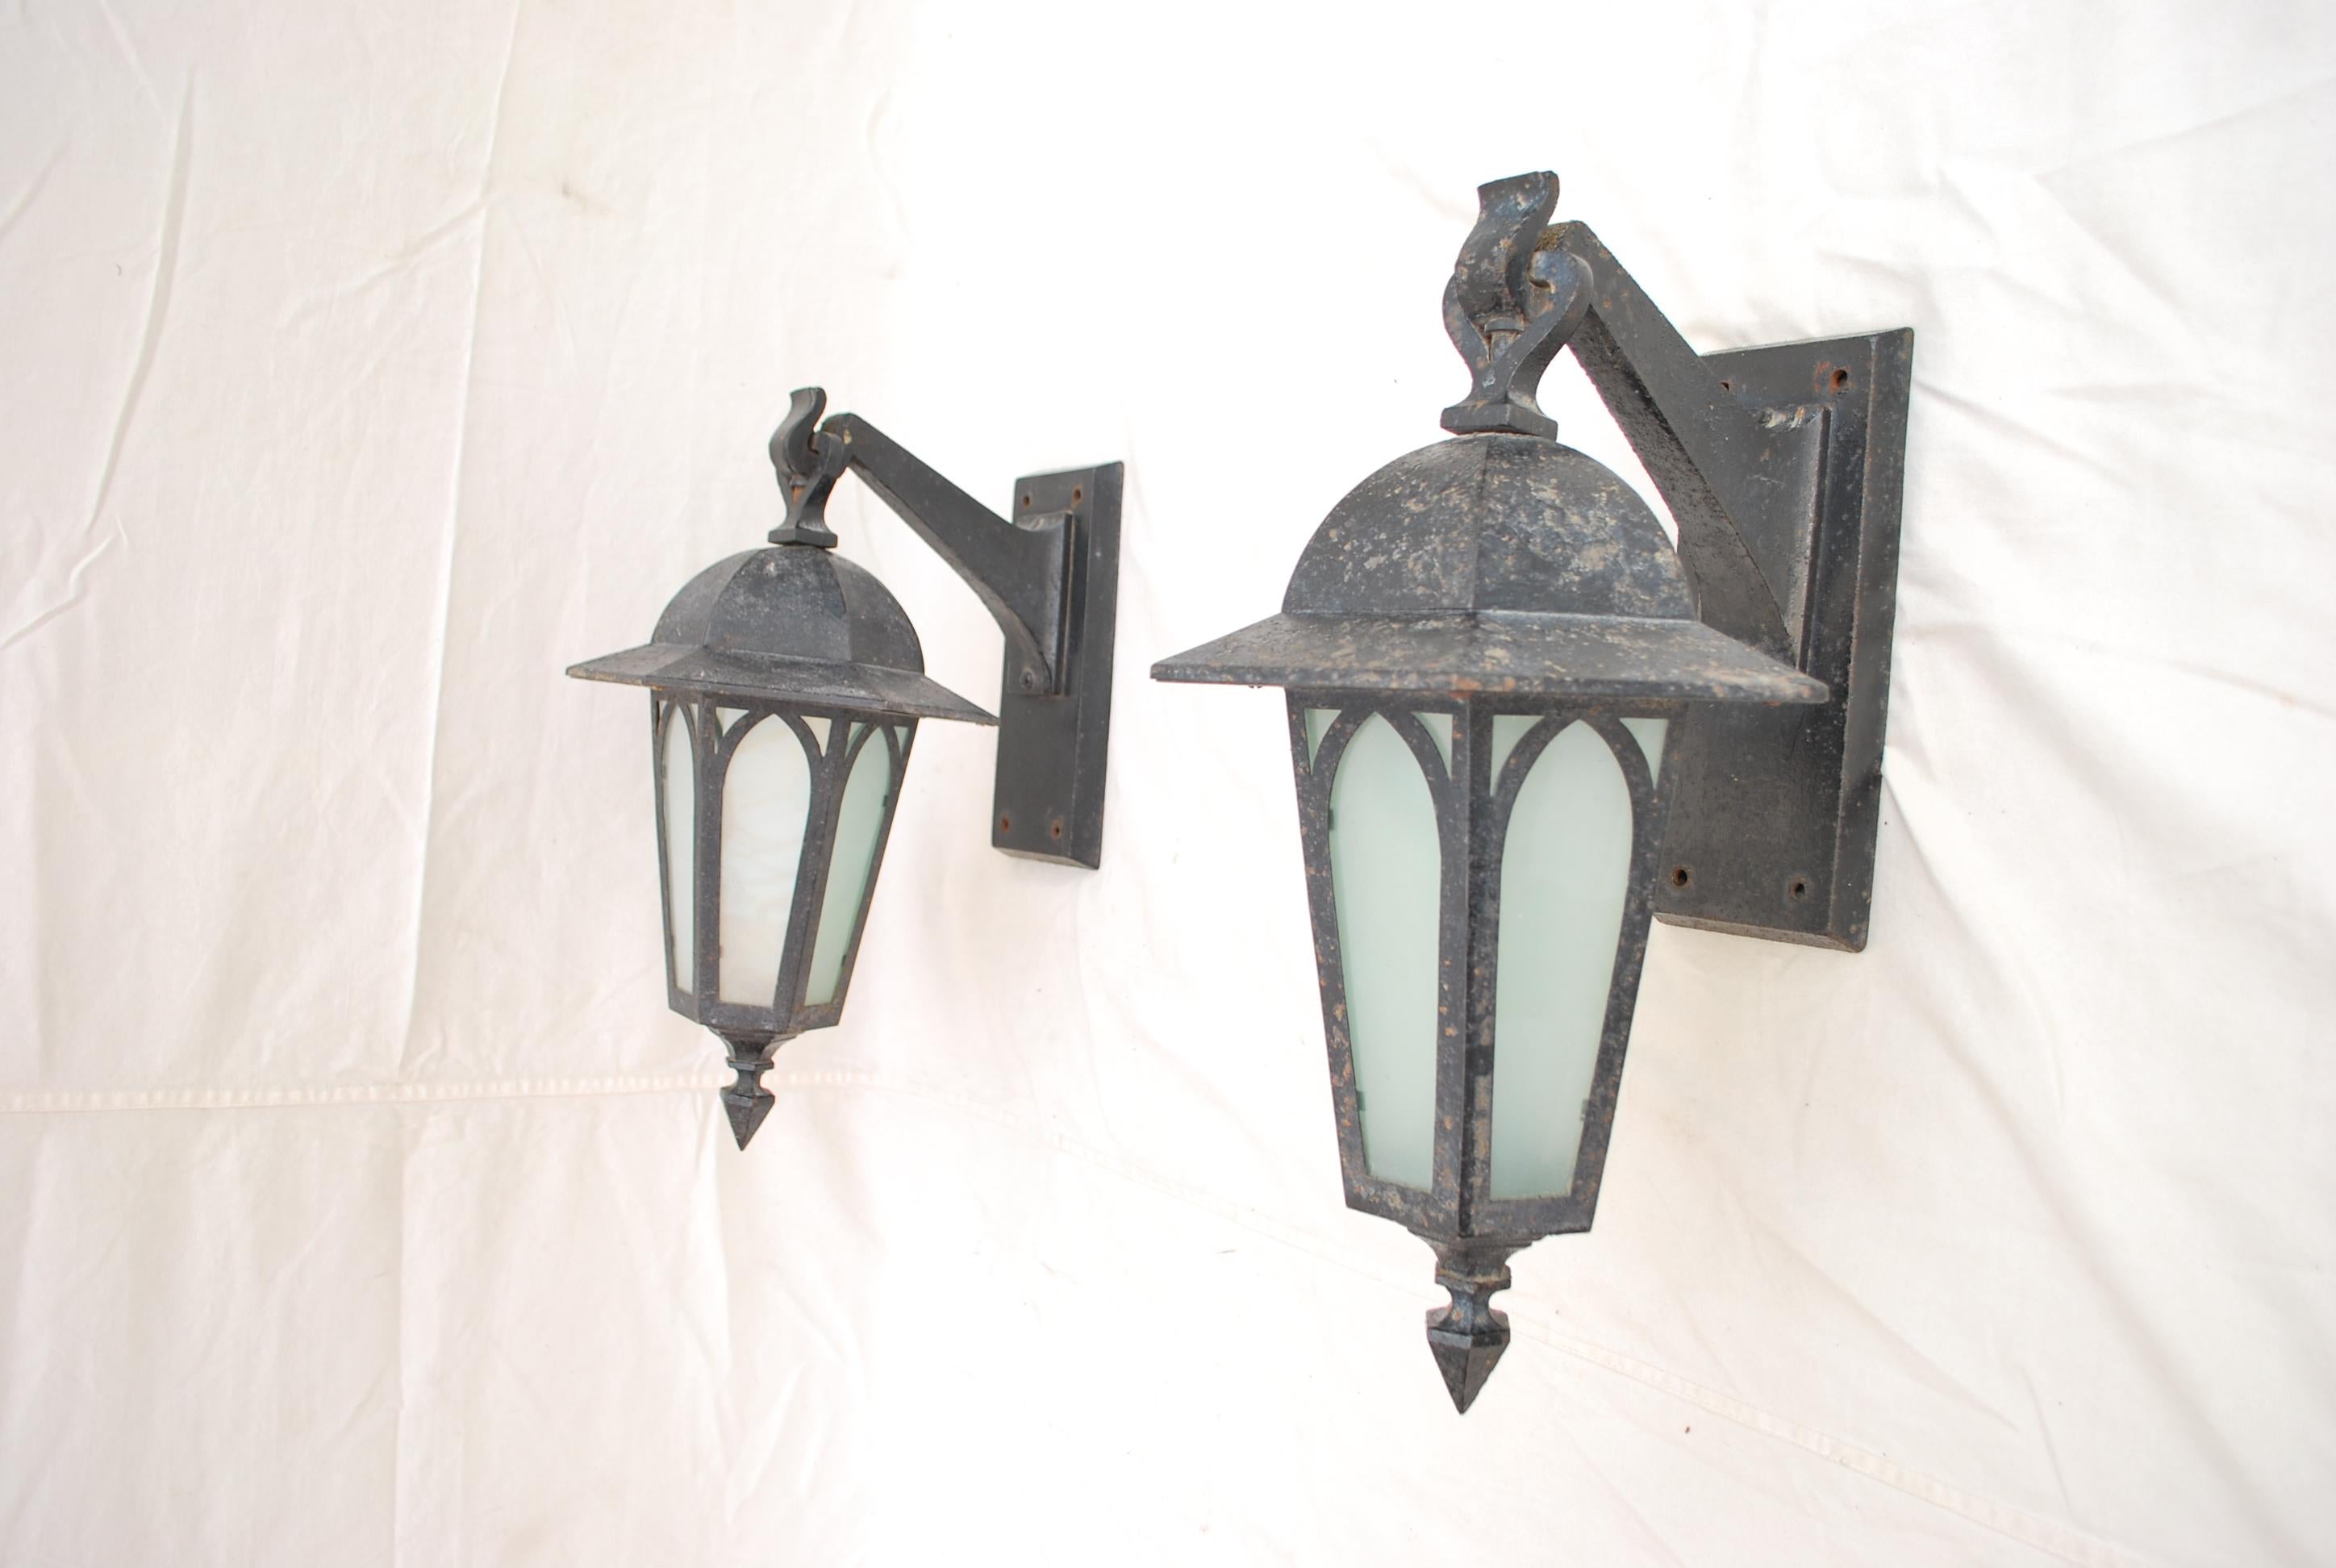 Rare Pair of 1920s Outdoor Sconces 1